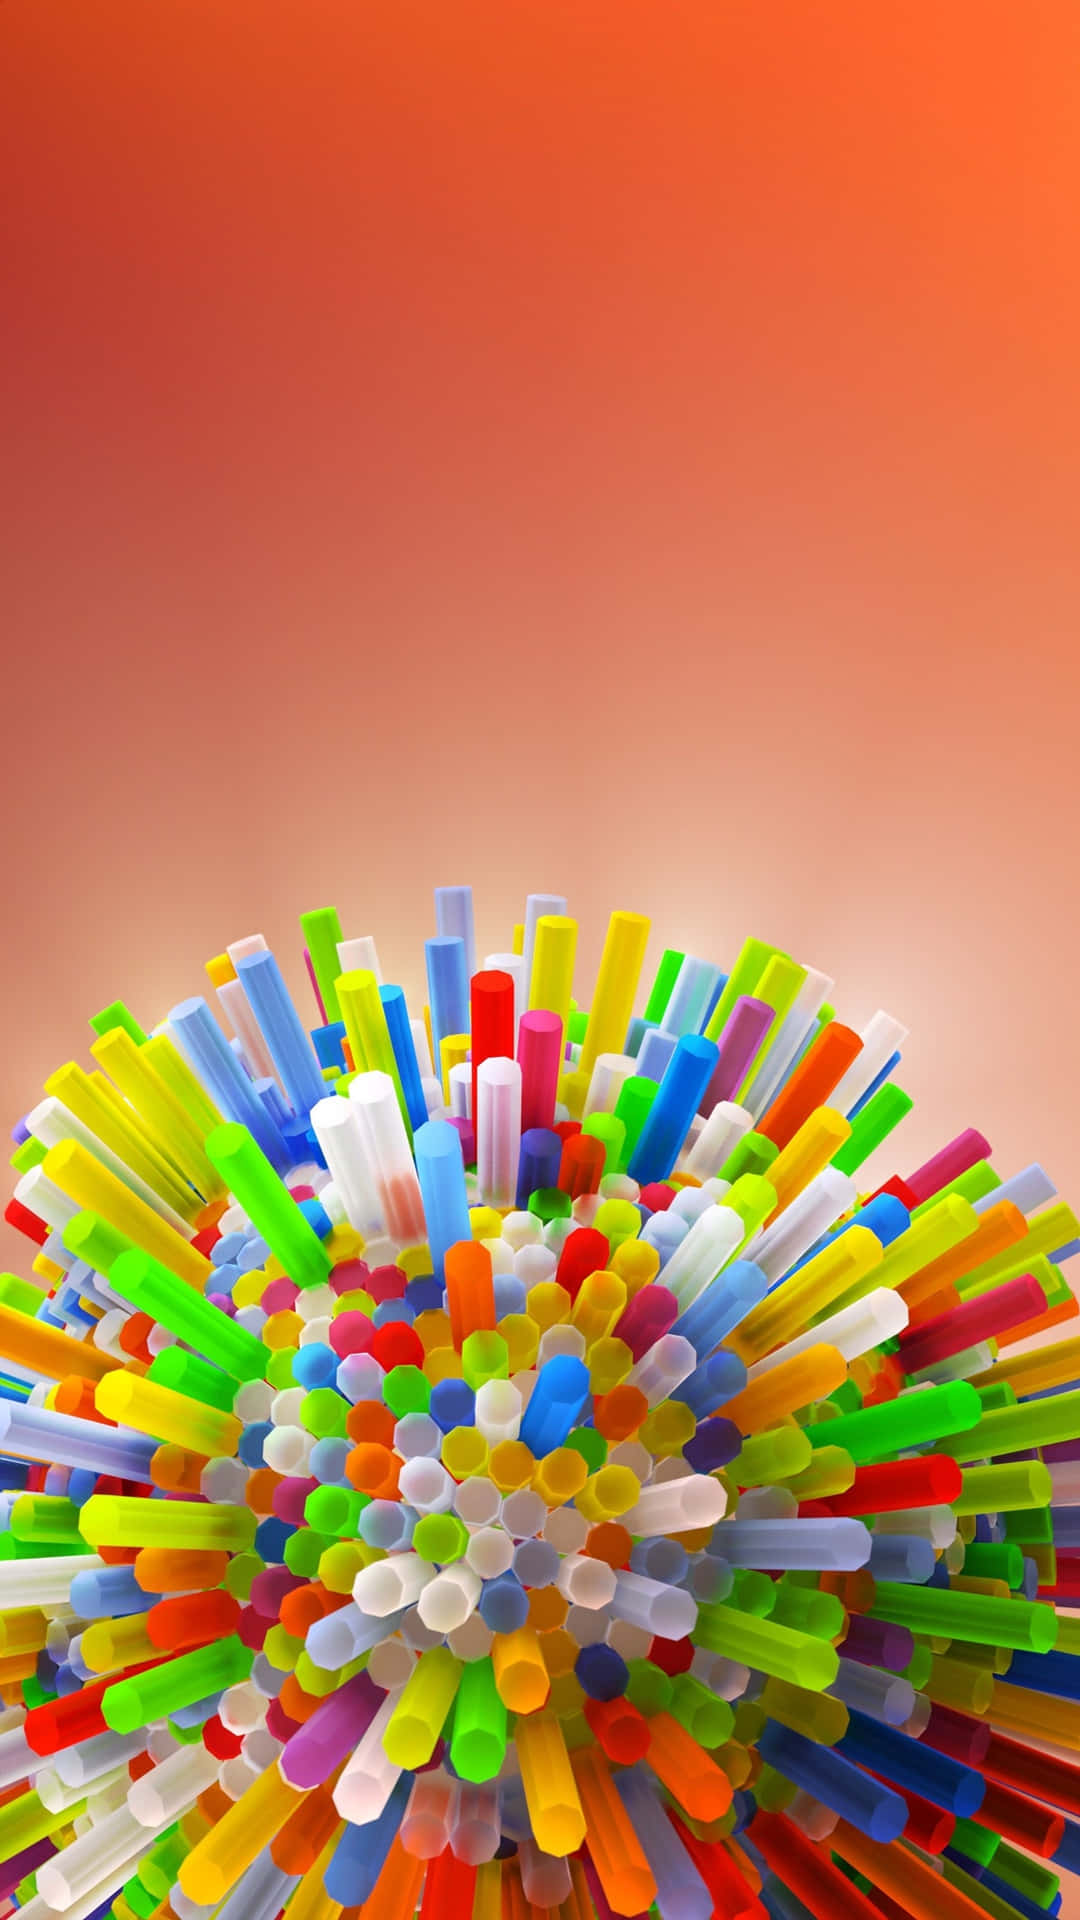 Sphere Shaped Straw Colorful 4k Phone Background